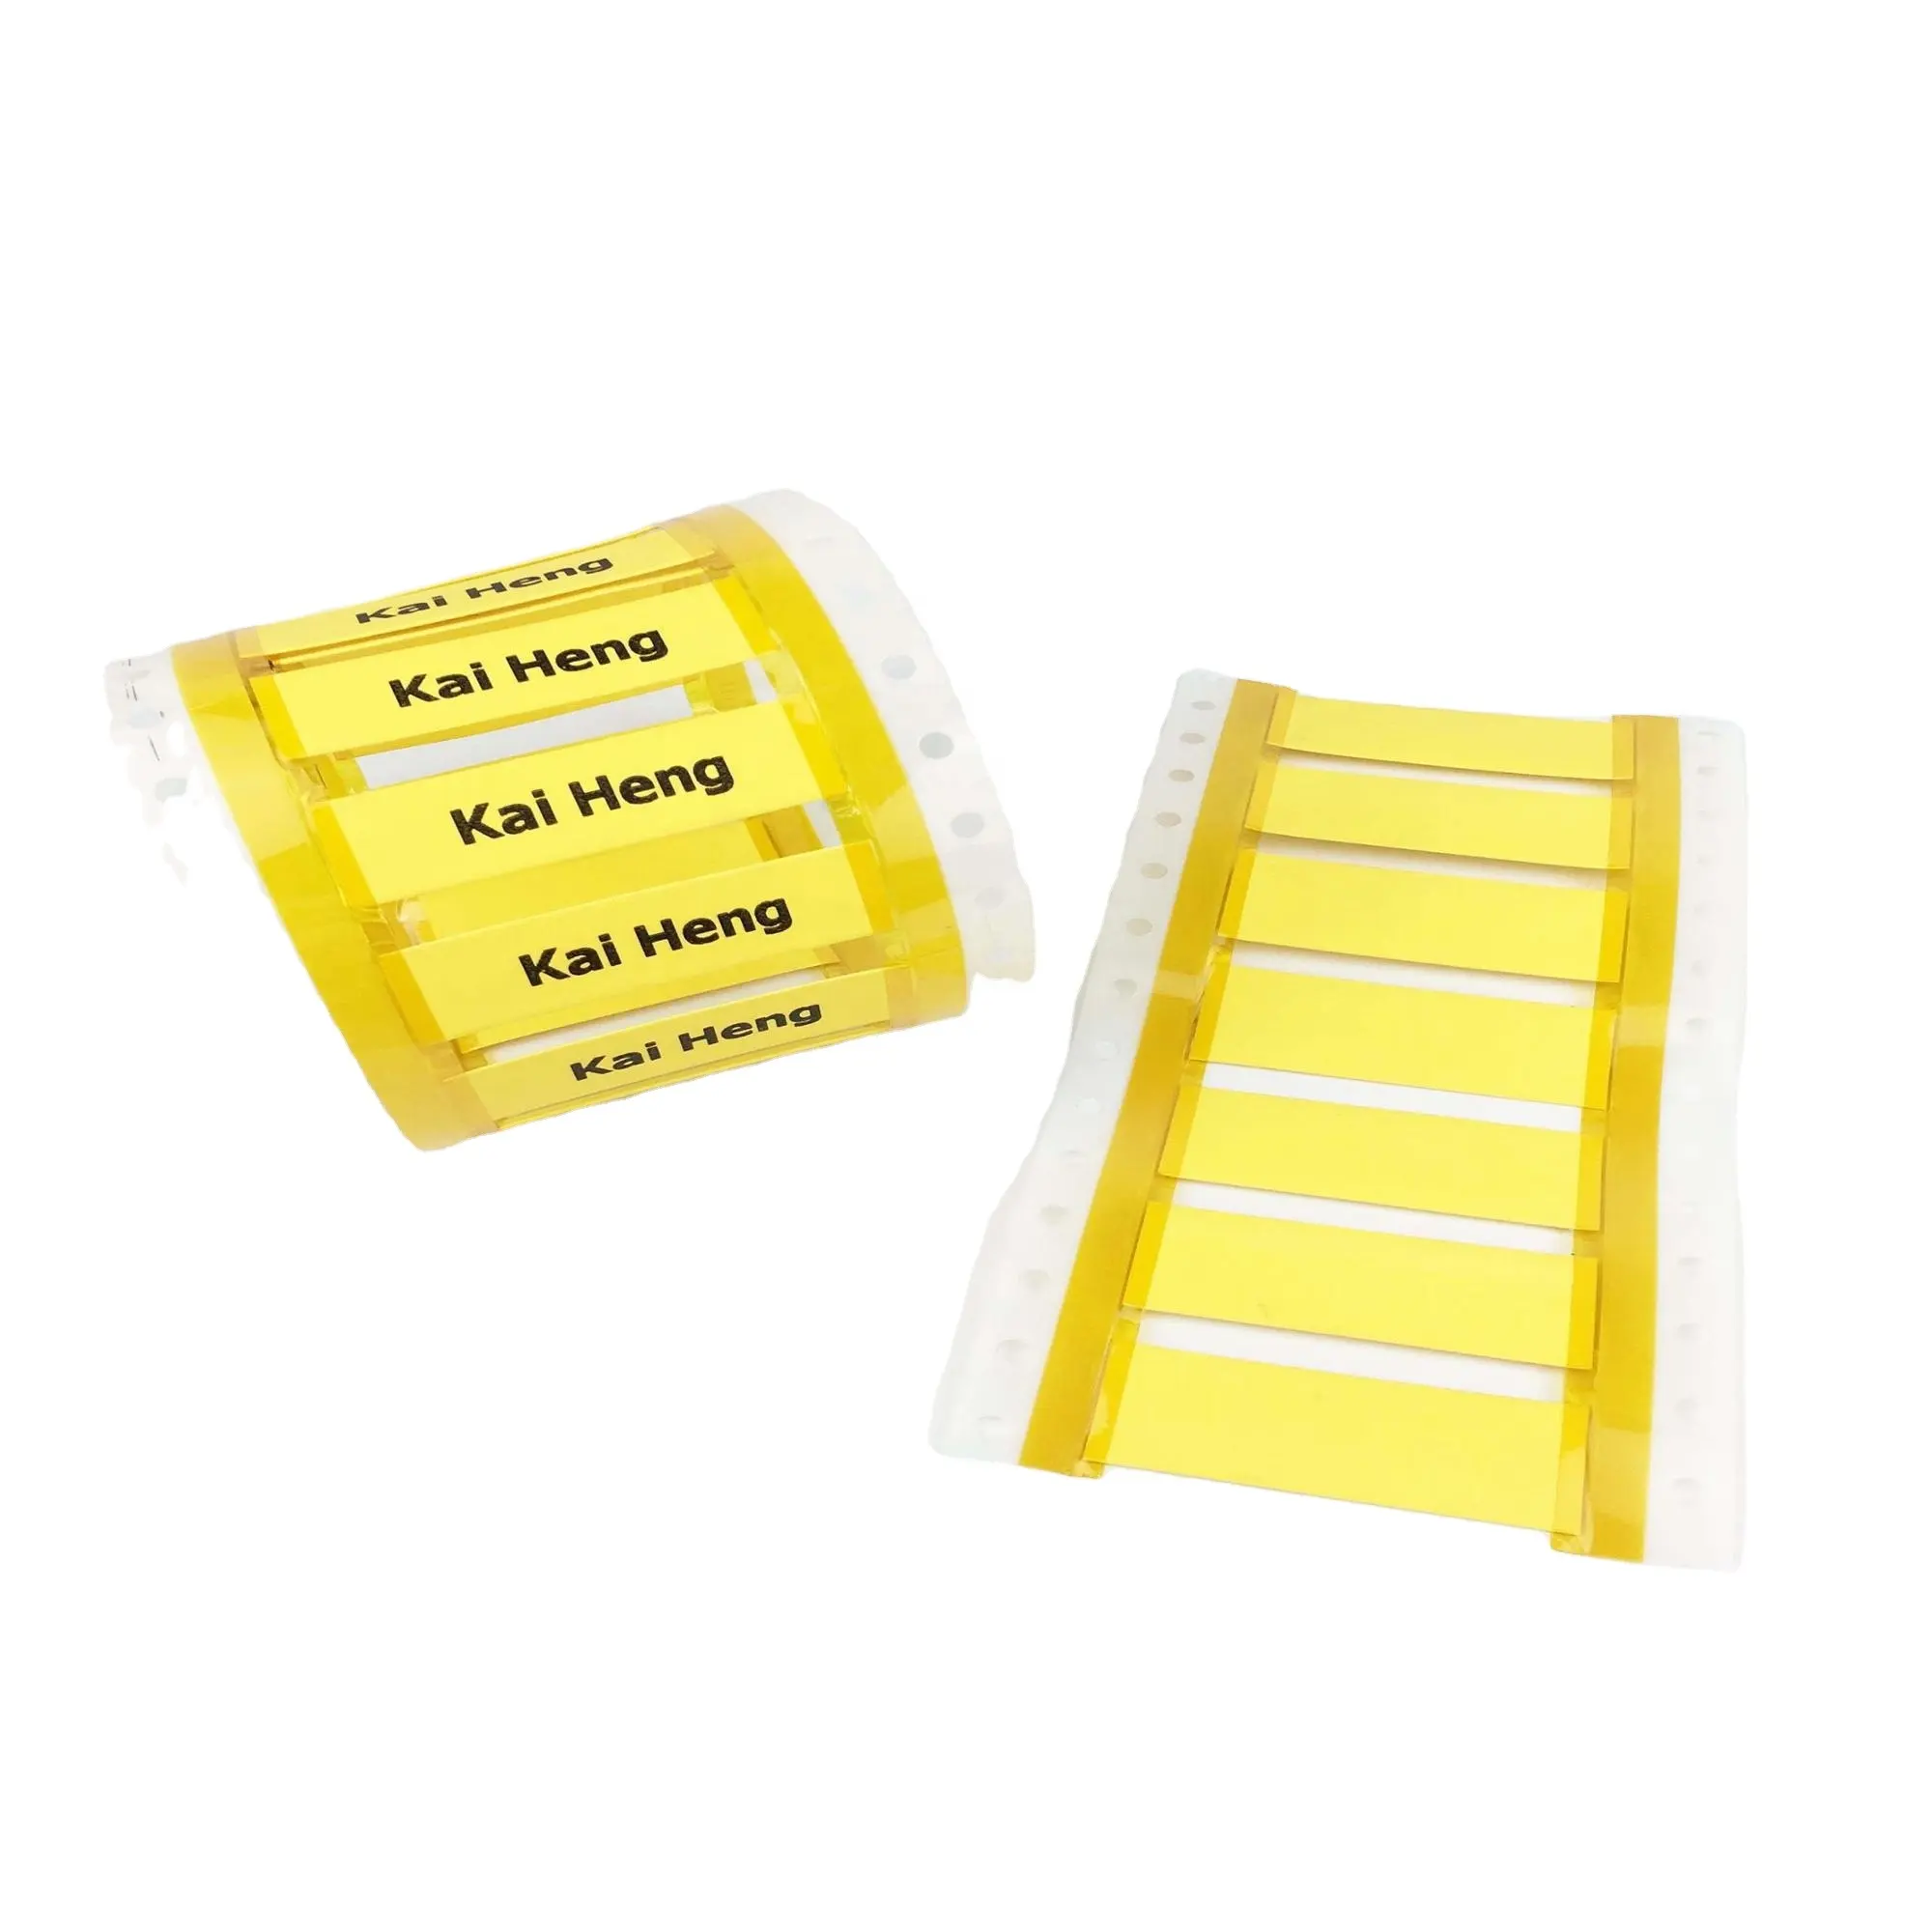 Flat Identification Shrink Tube Heat Shrink Cable Marker Sleeve 1/4 "Yellow White Insulation Sleeving Composite Polymer